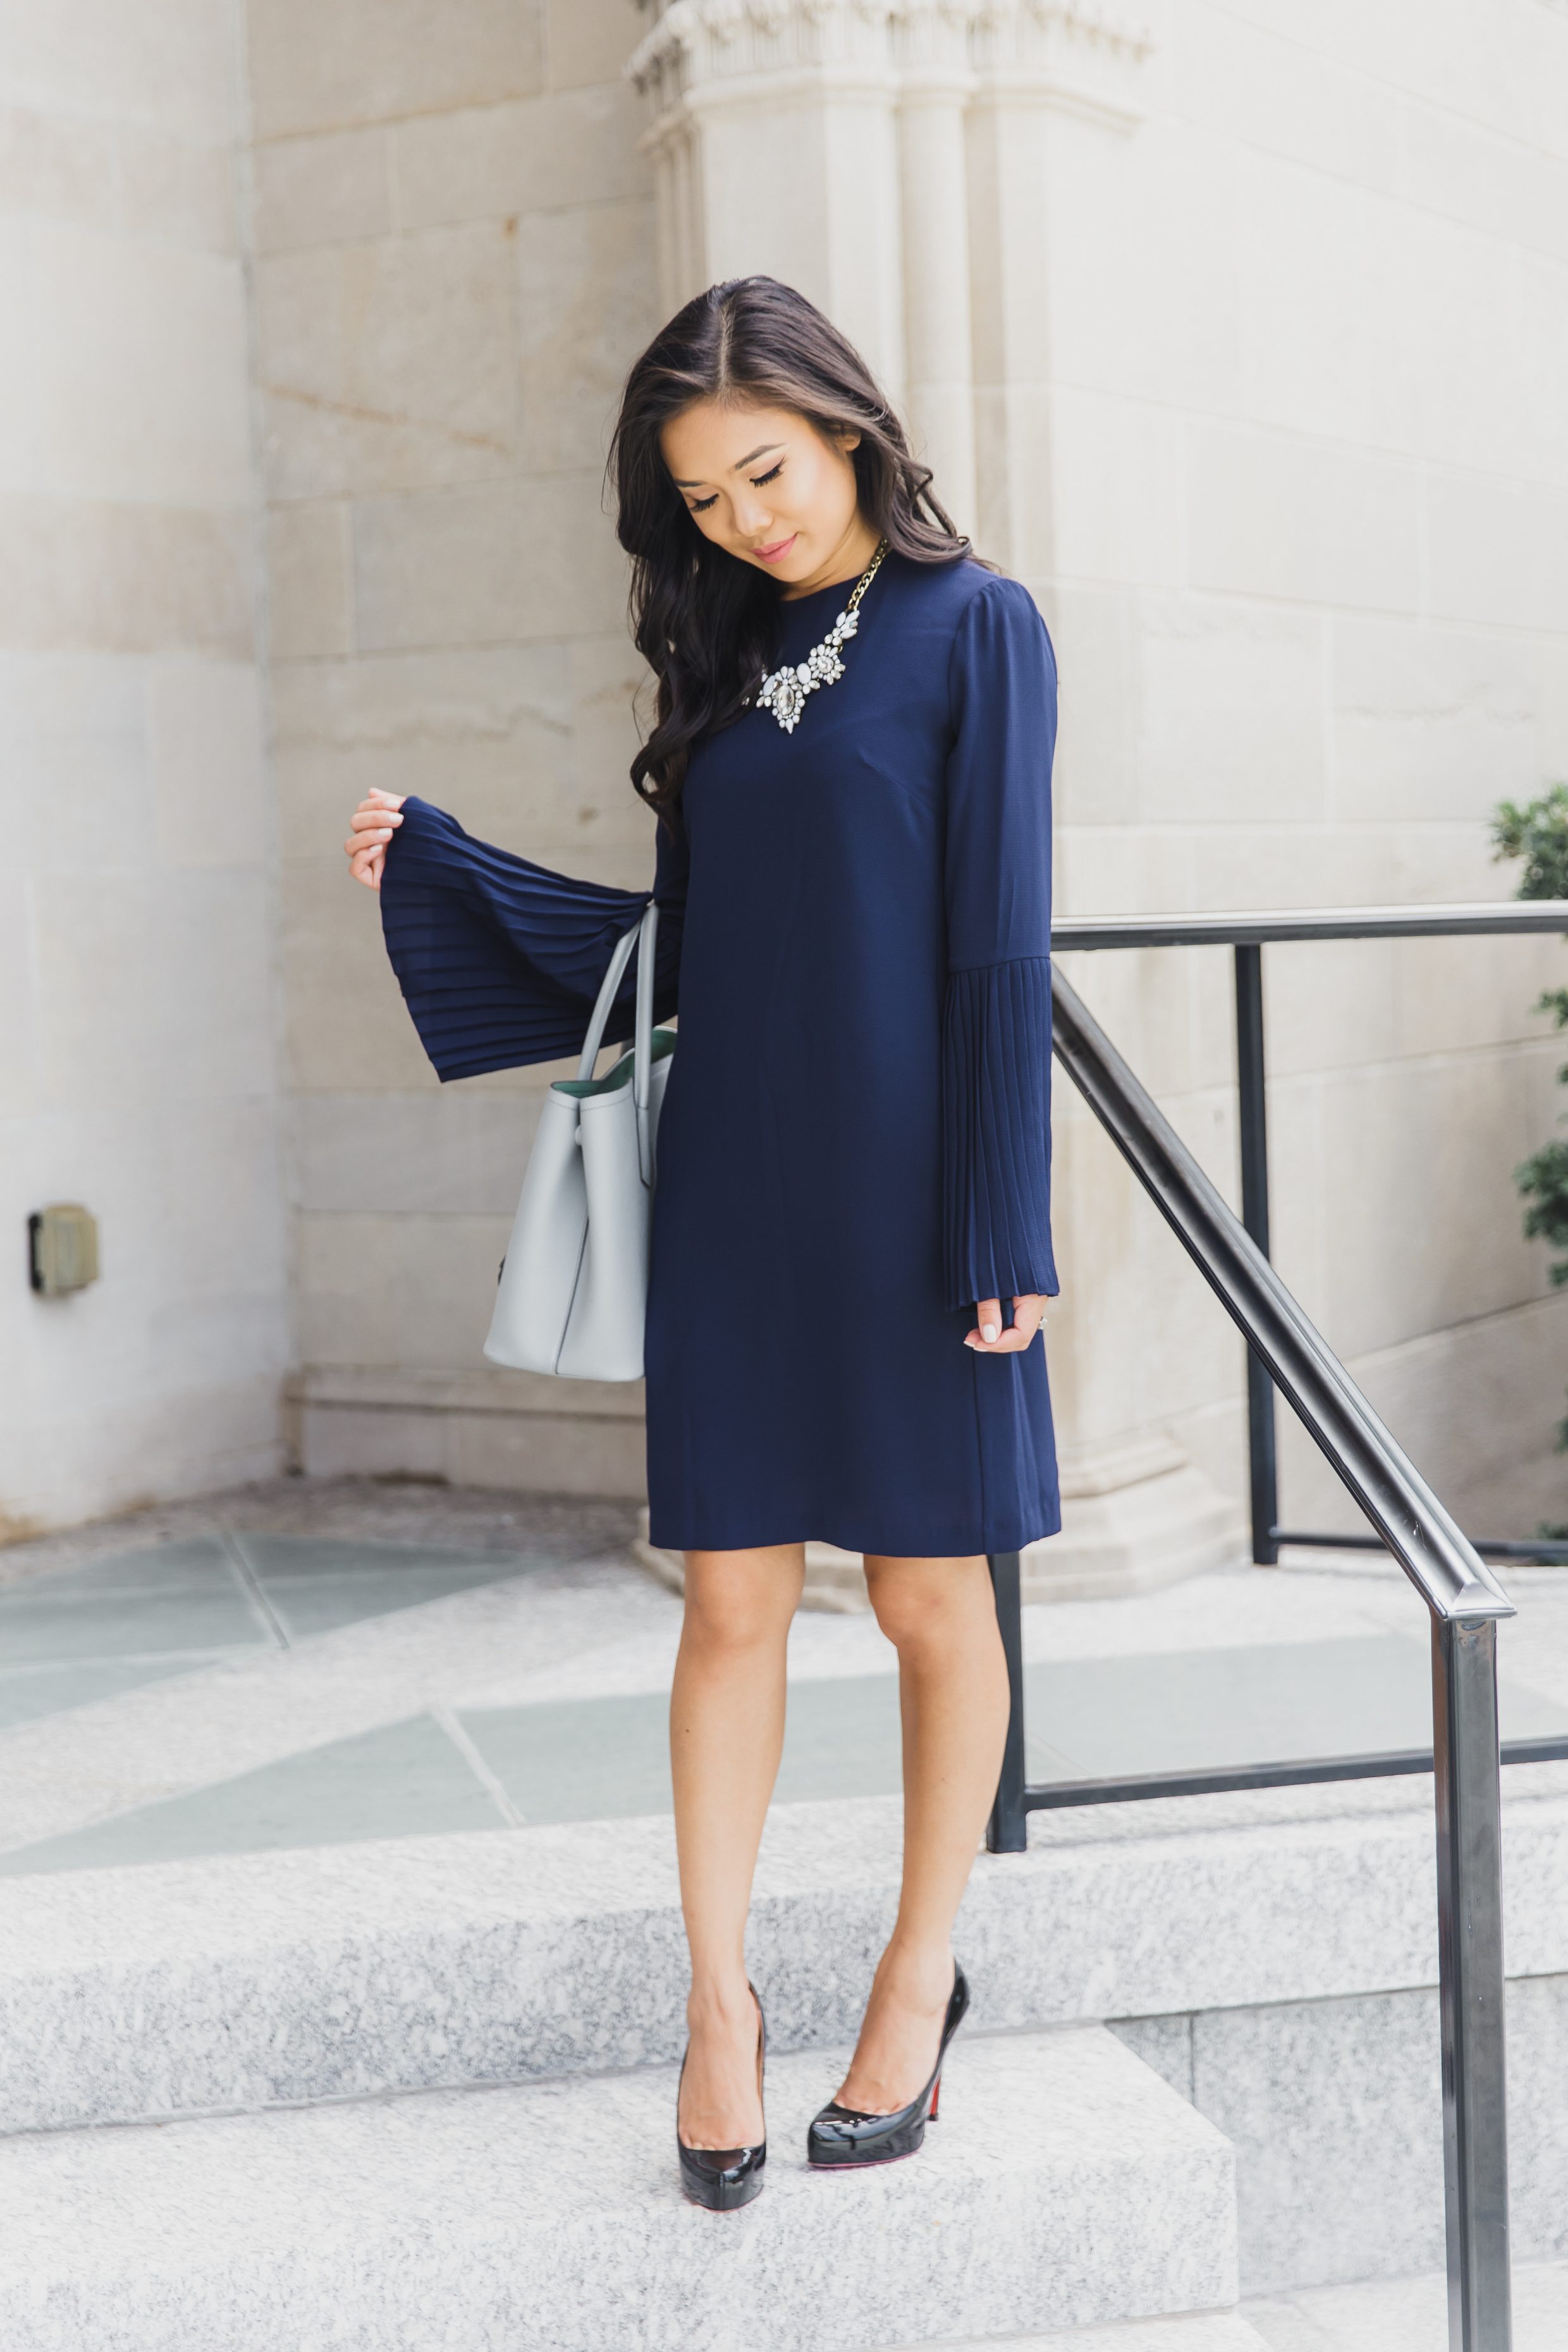 COLOR & CHIC | What I Wear to Work - Bell Sleeve Shift